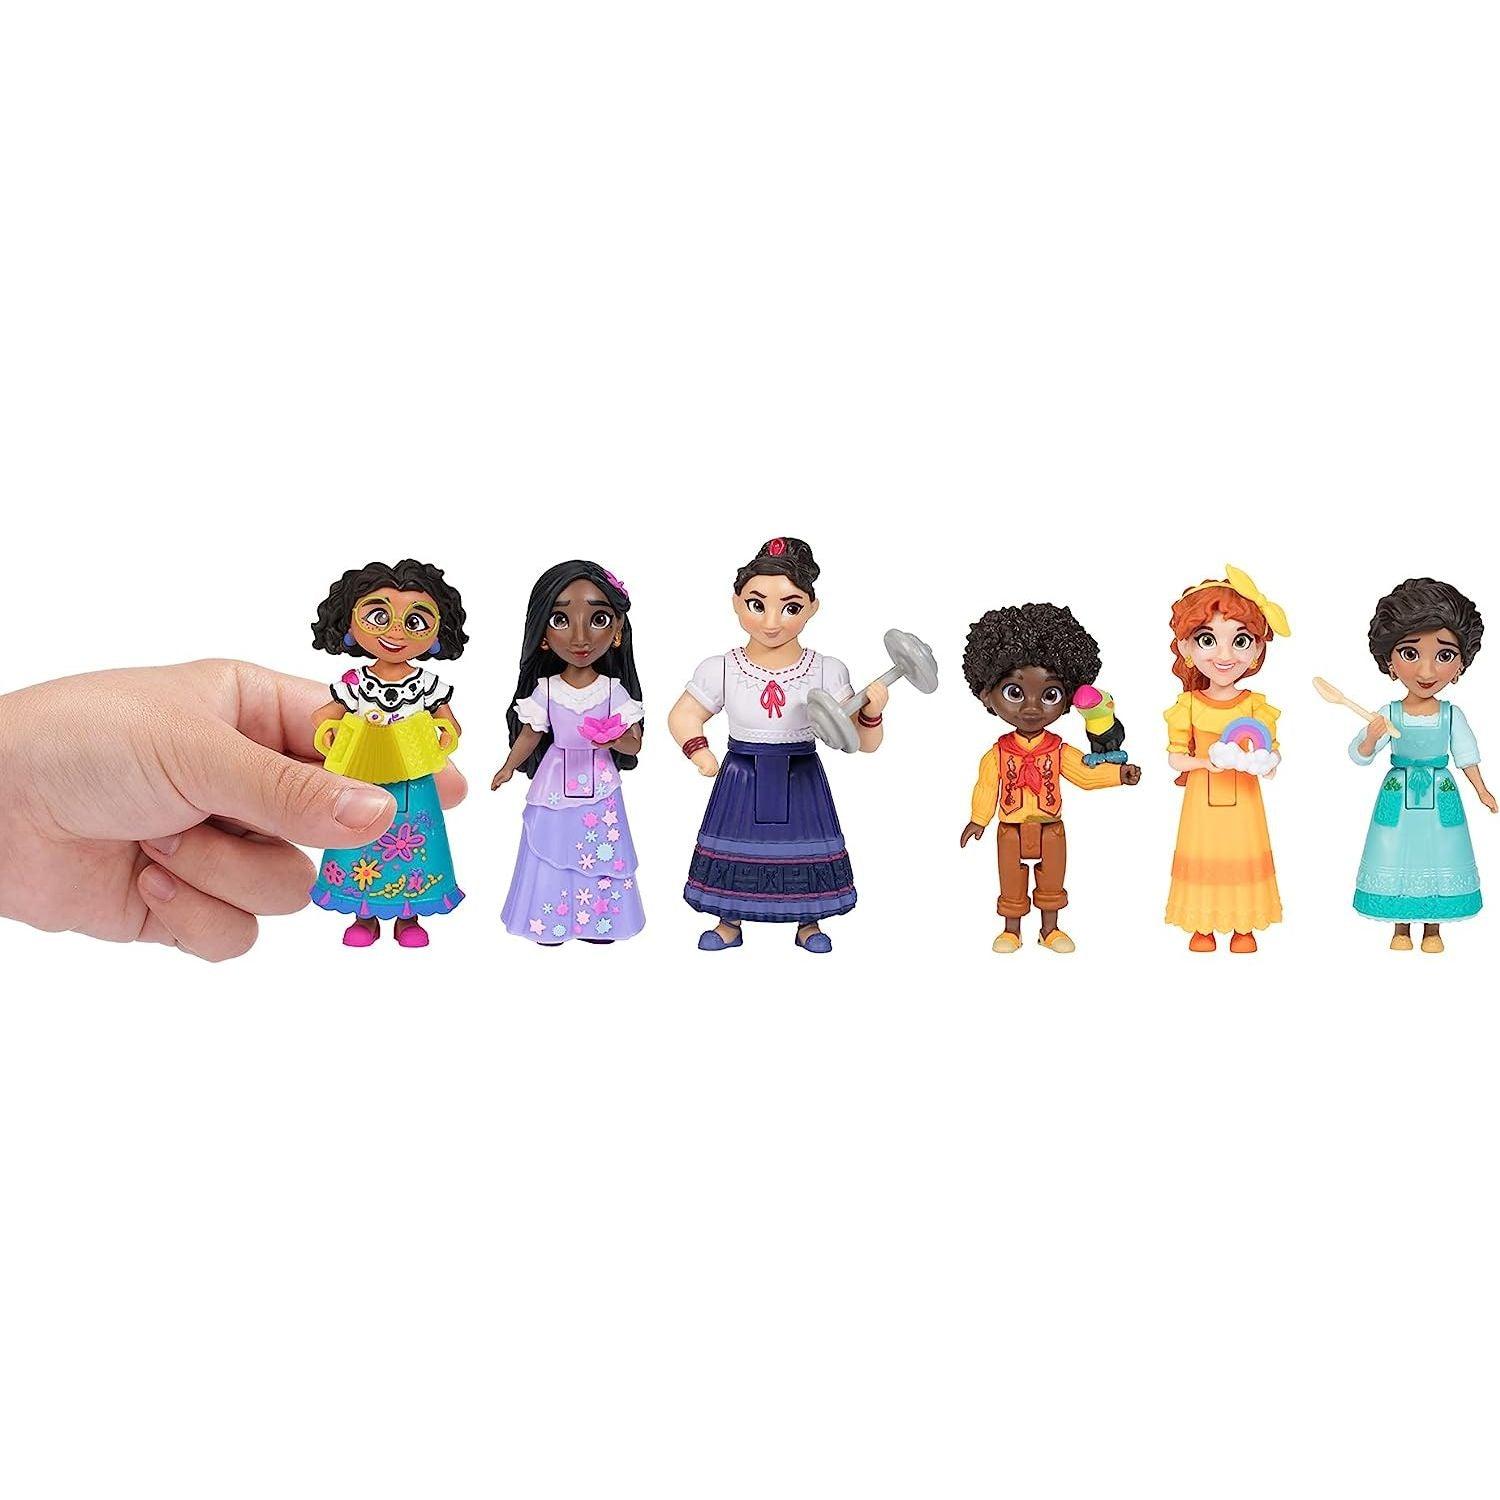 Disney Encanto Doll Figures, The Madrigal Family 6-Pack Set Each with an Accessory - Great to Play with The Casa Madrigal - BumbleToys - 2-4 Years, Boys, Disney, Encanto, Girls, OXE, Pre-Order